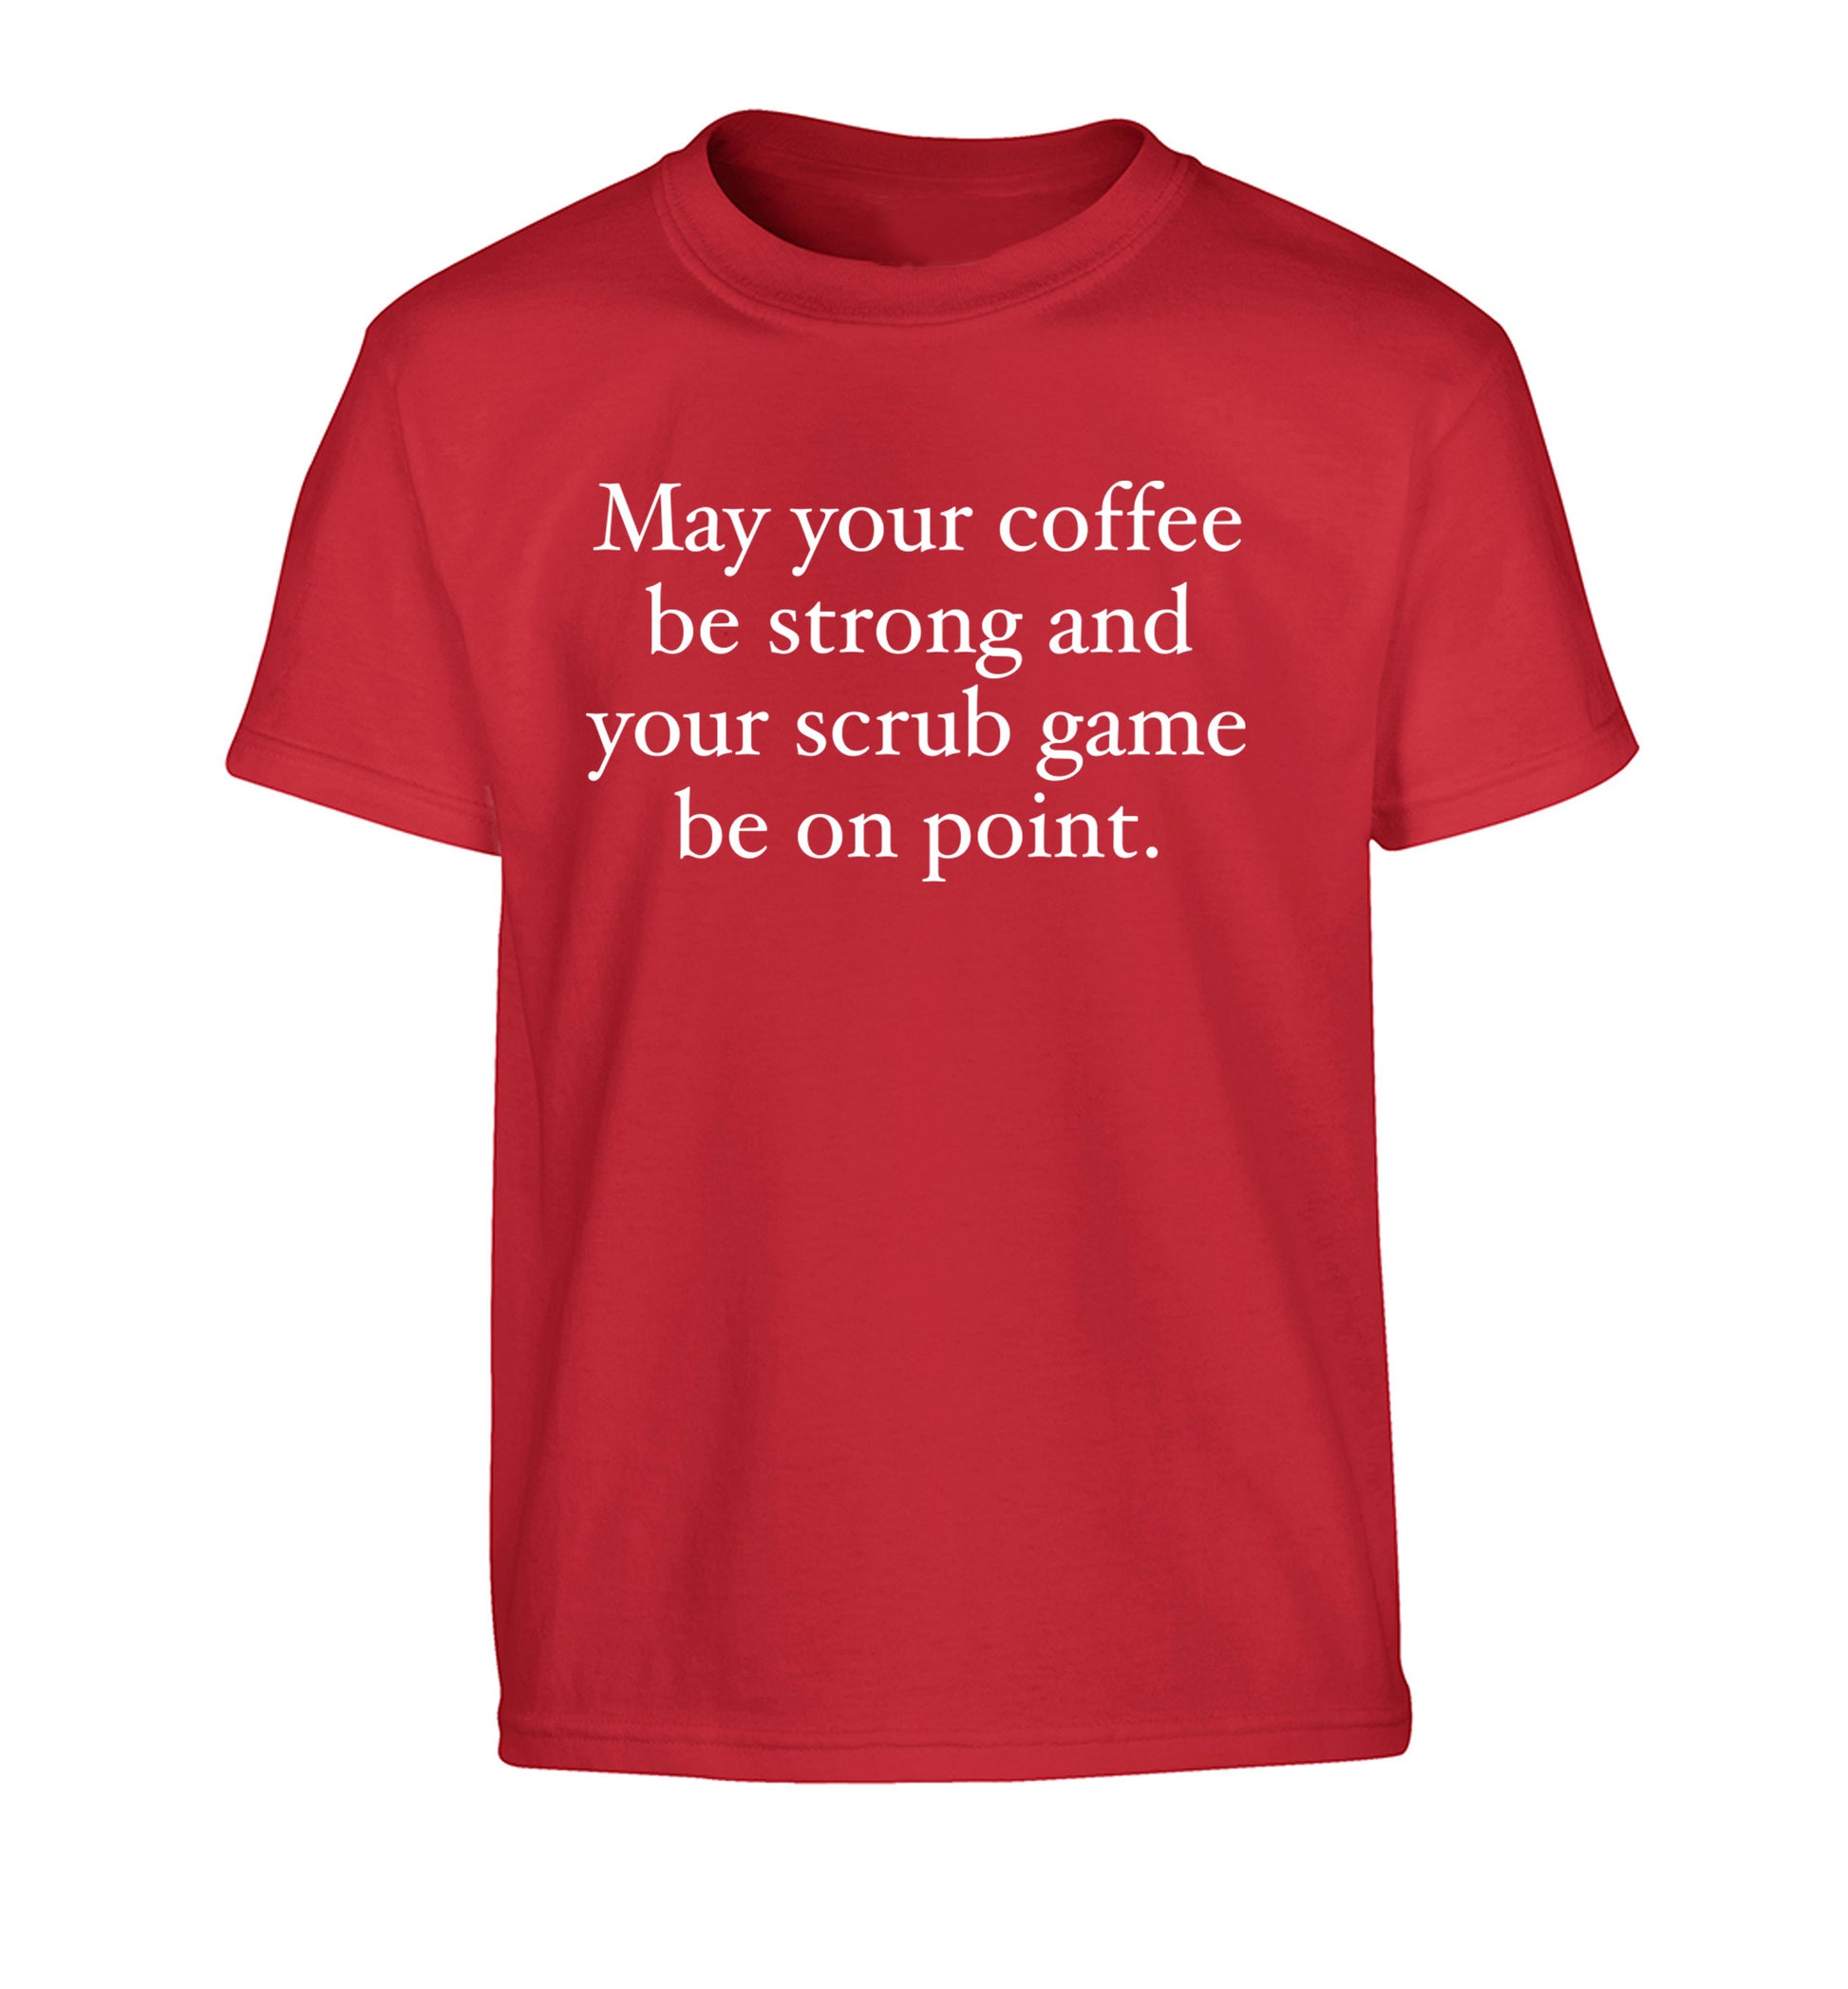 May your caffeine be strong and your scrub game be on point Children's red Tshirt 12-14 Years